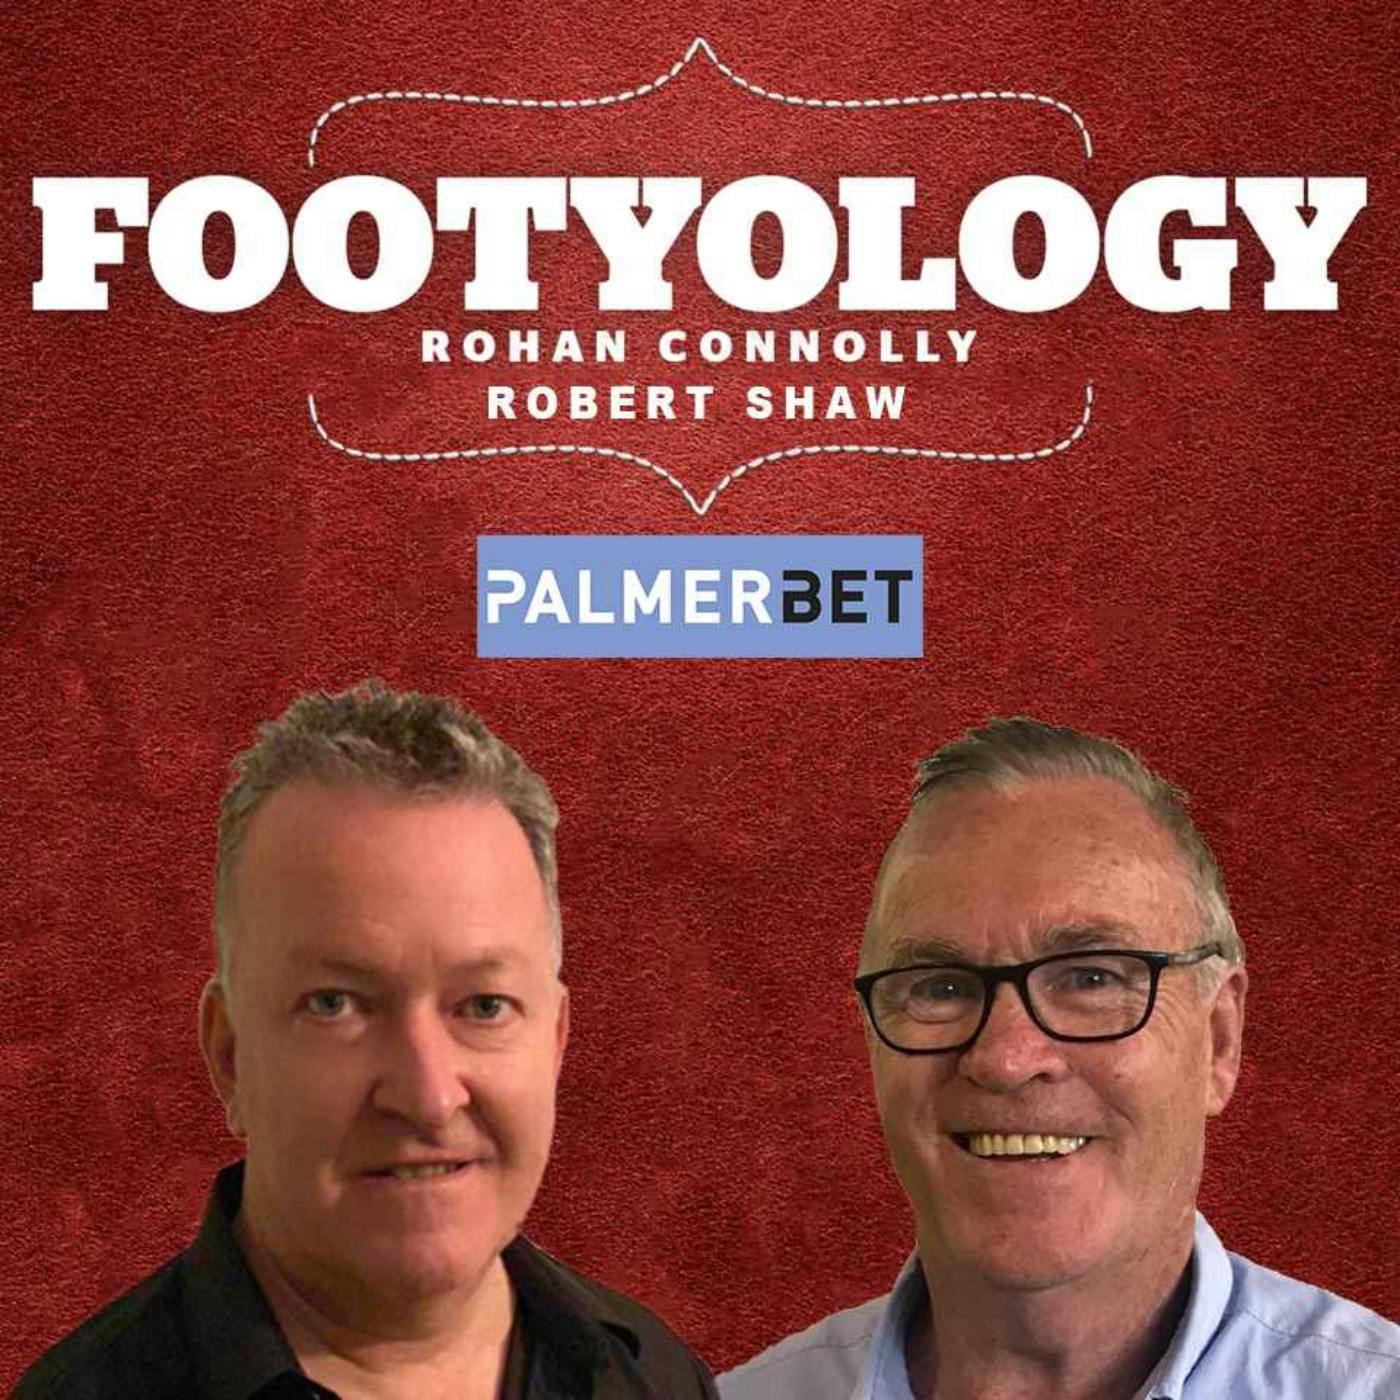 Footyology Podcast - August 17th 2022